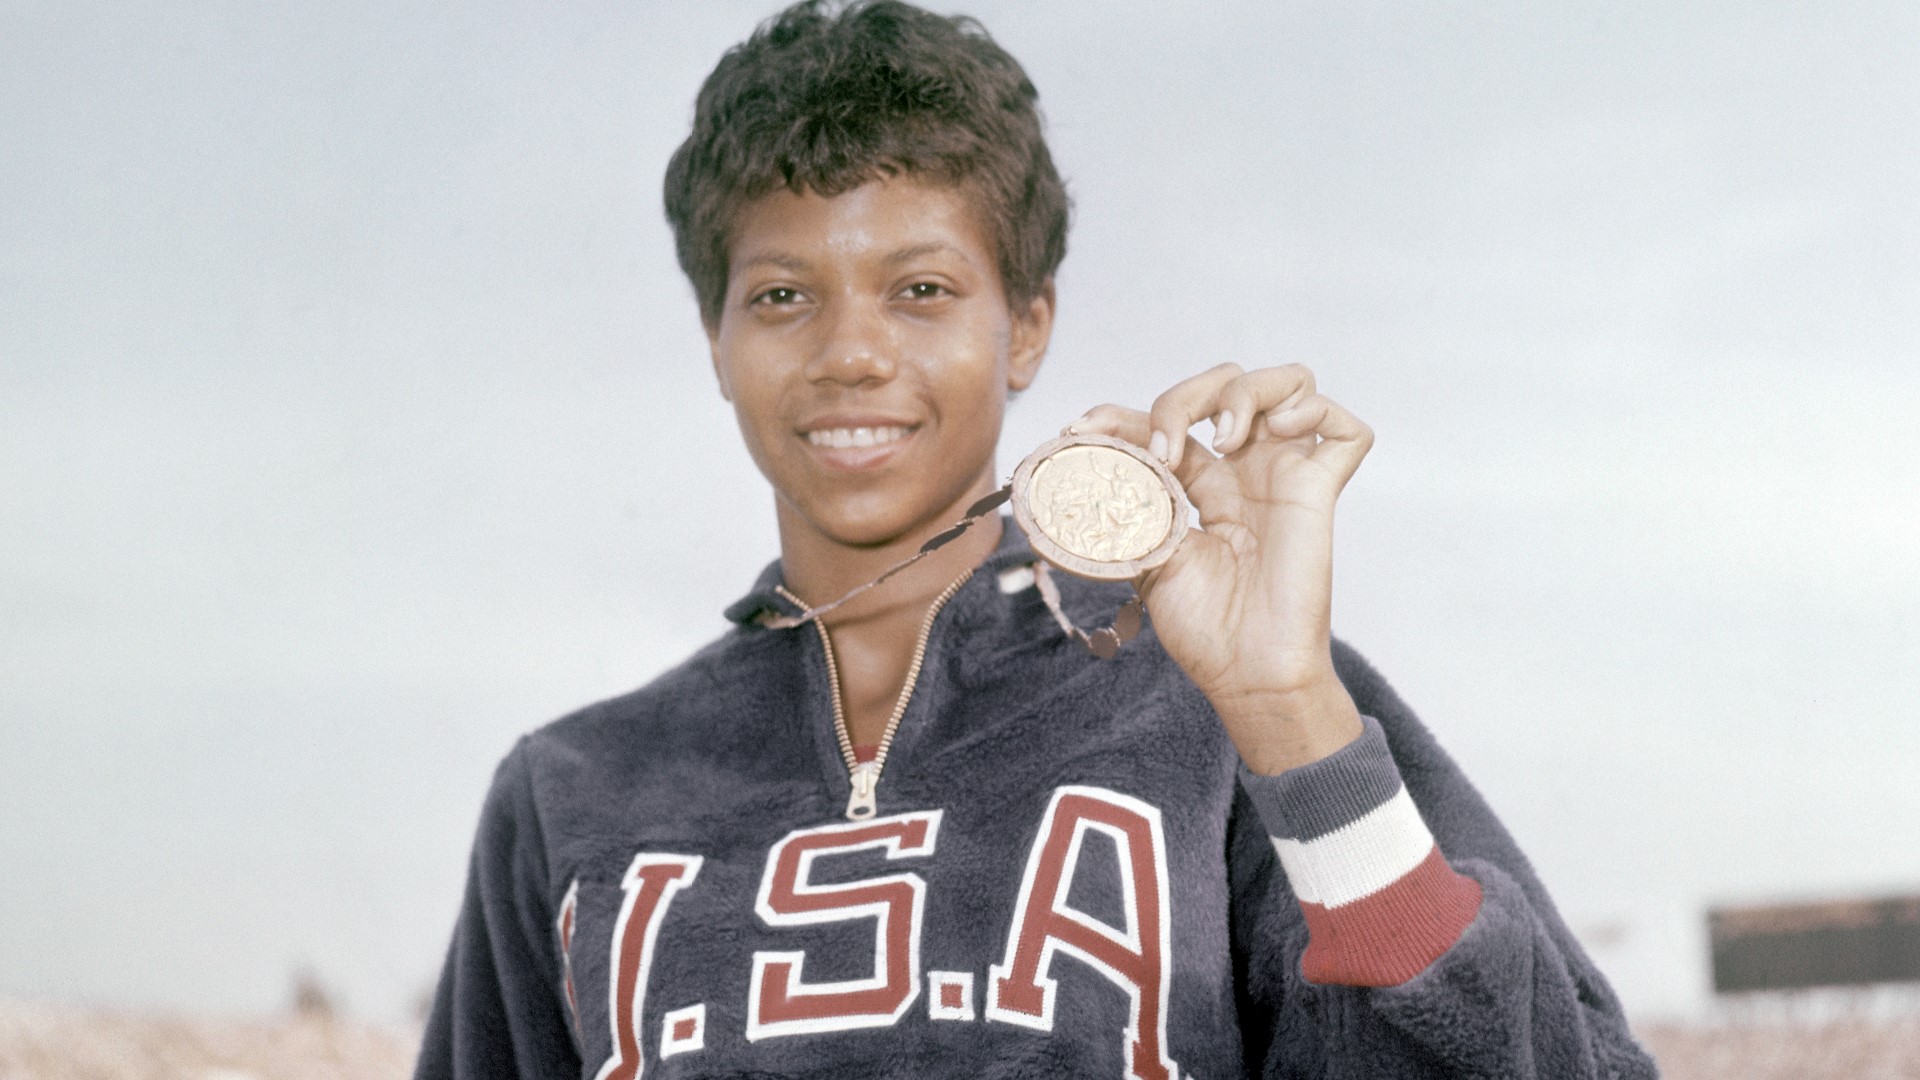 Wilma Rudolph set a world record and won gold in the 100-meter and 200-meter sprints, and the 4X100 meter relay in the 1960 Olympic Games in Rome, Italy.